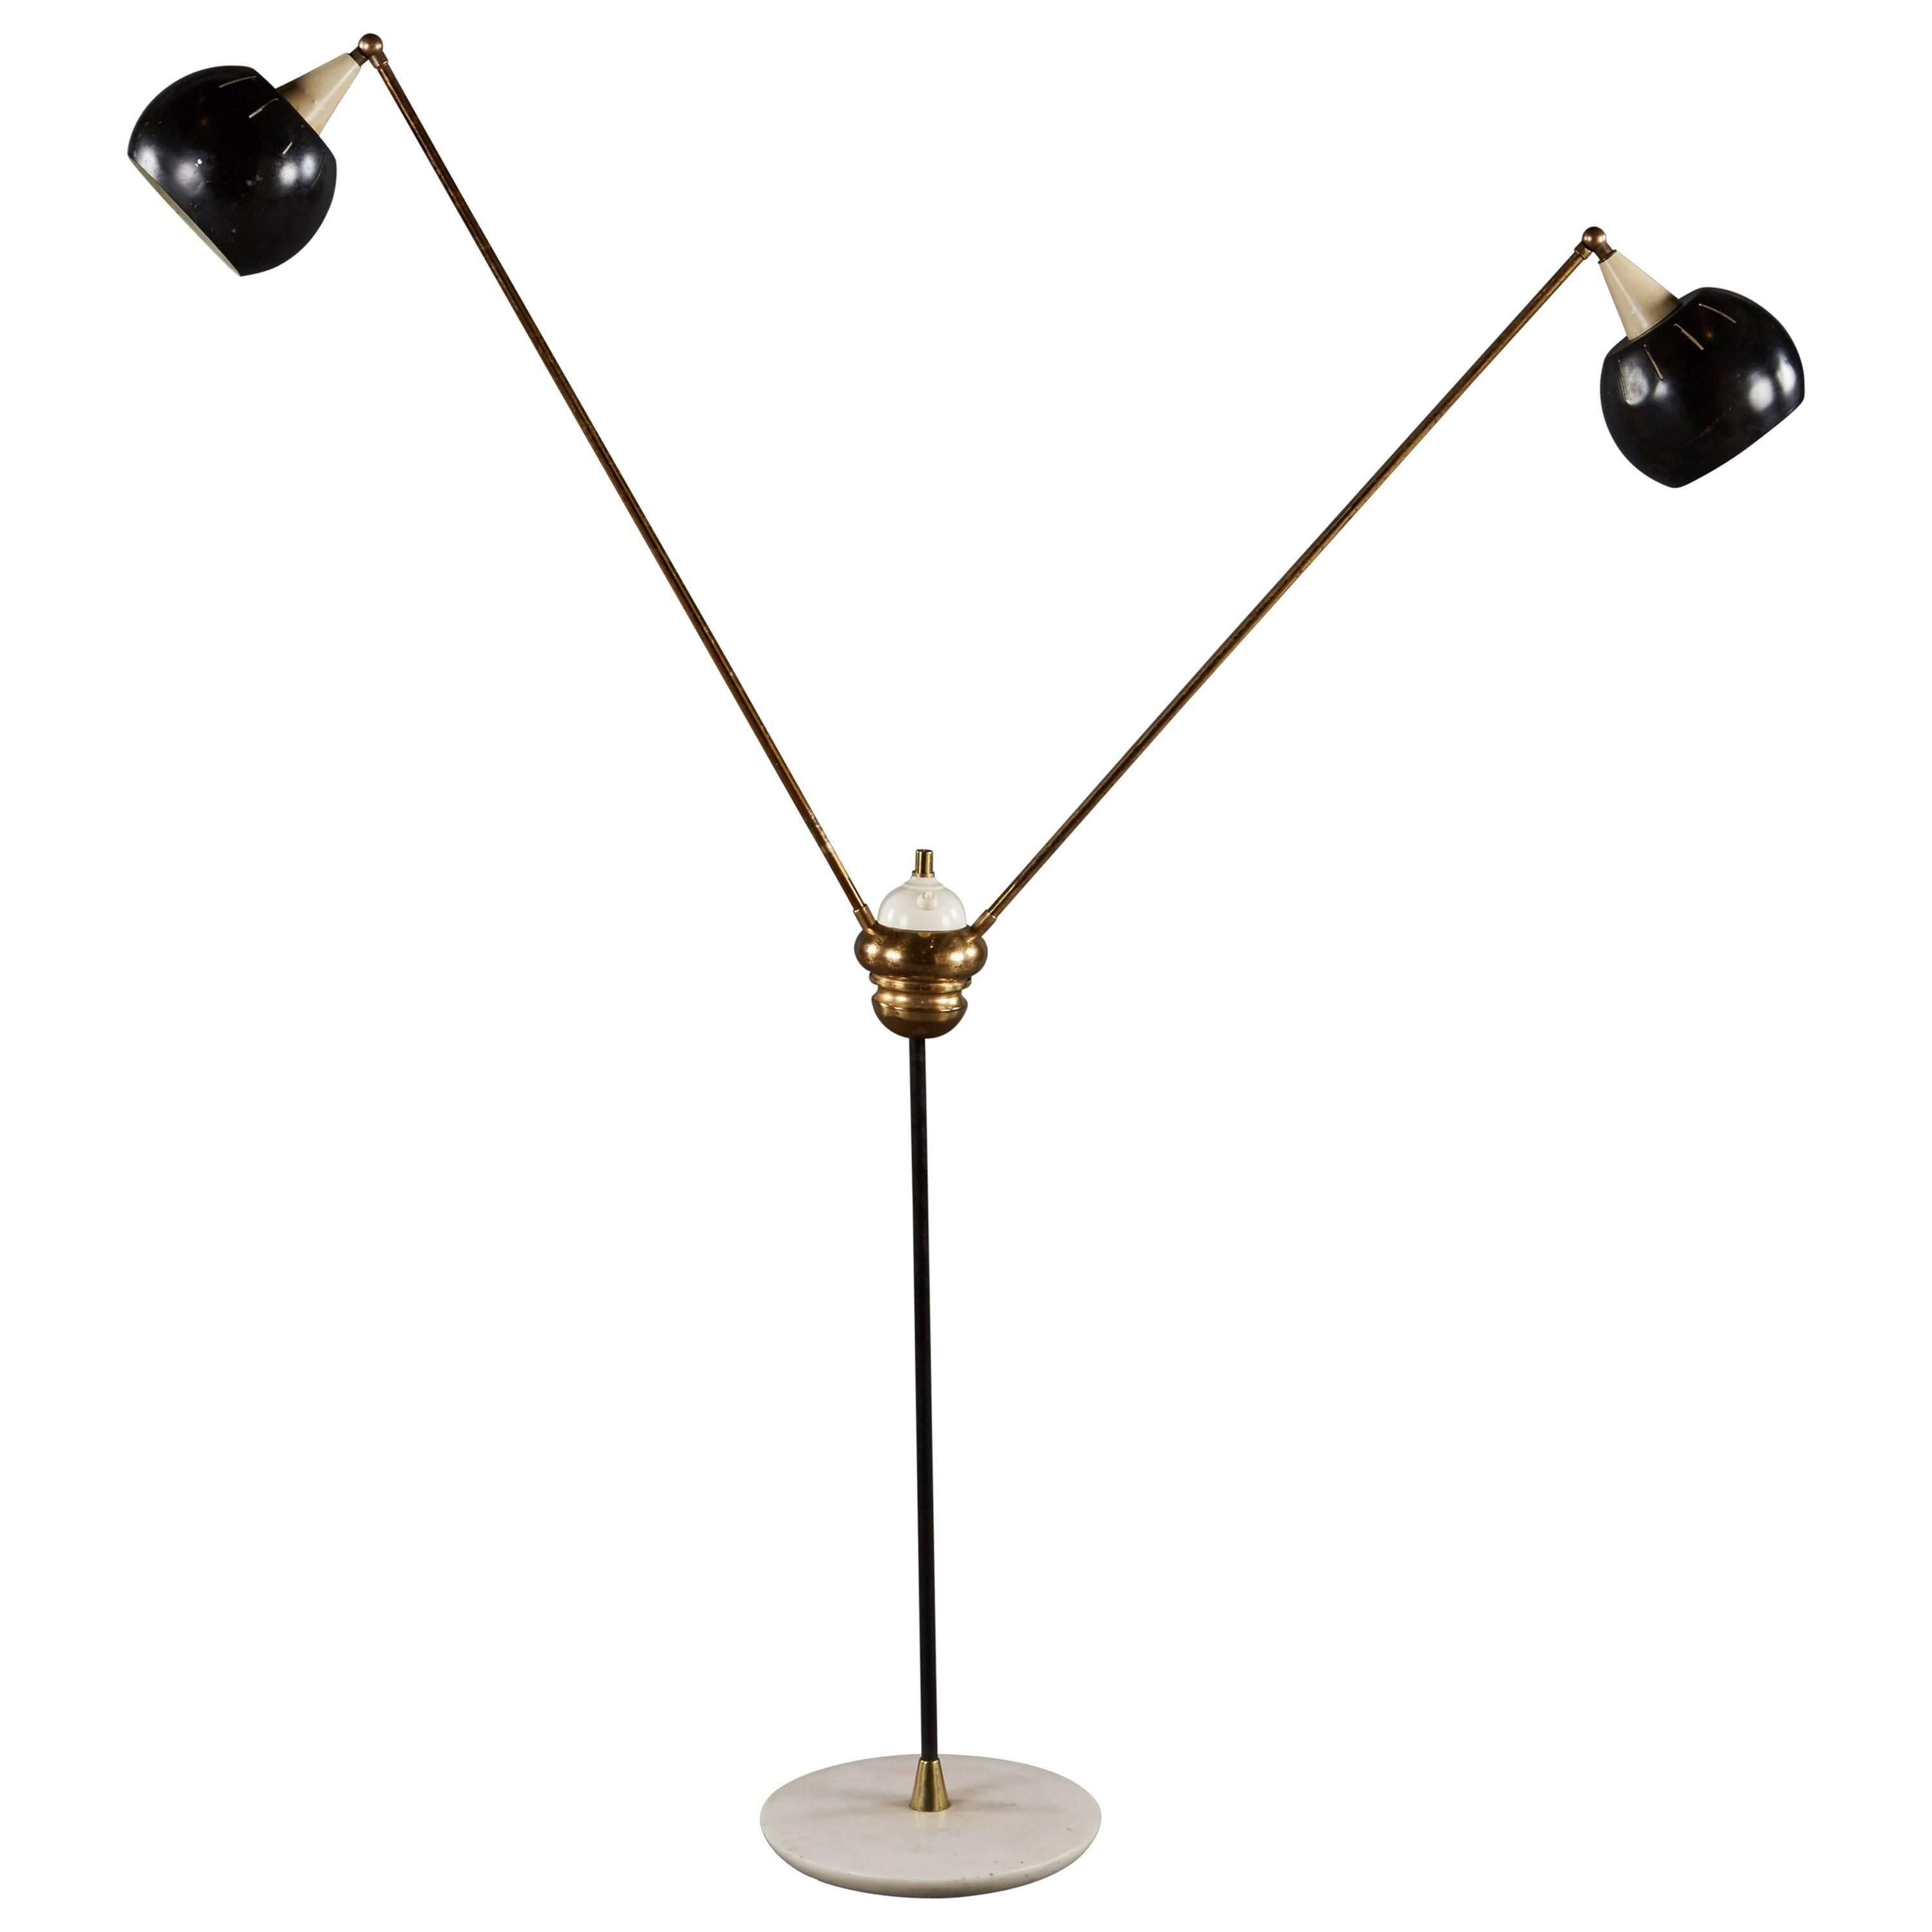 Charming Double Arm Italian Floor Lamp with Articulating Vented Metal Shades